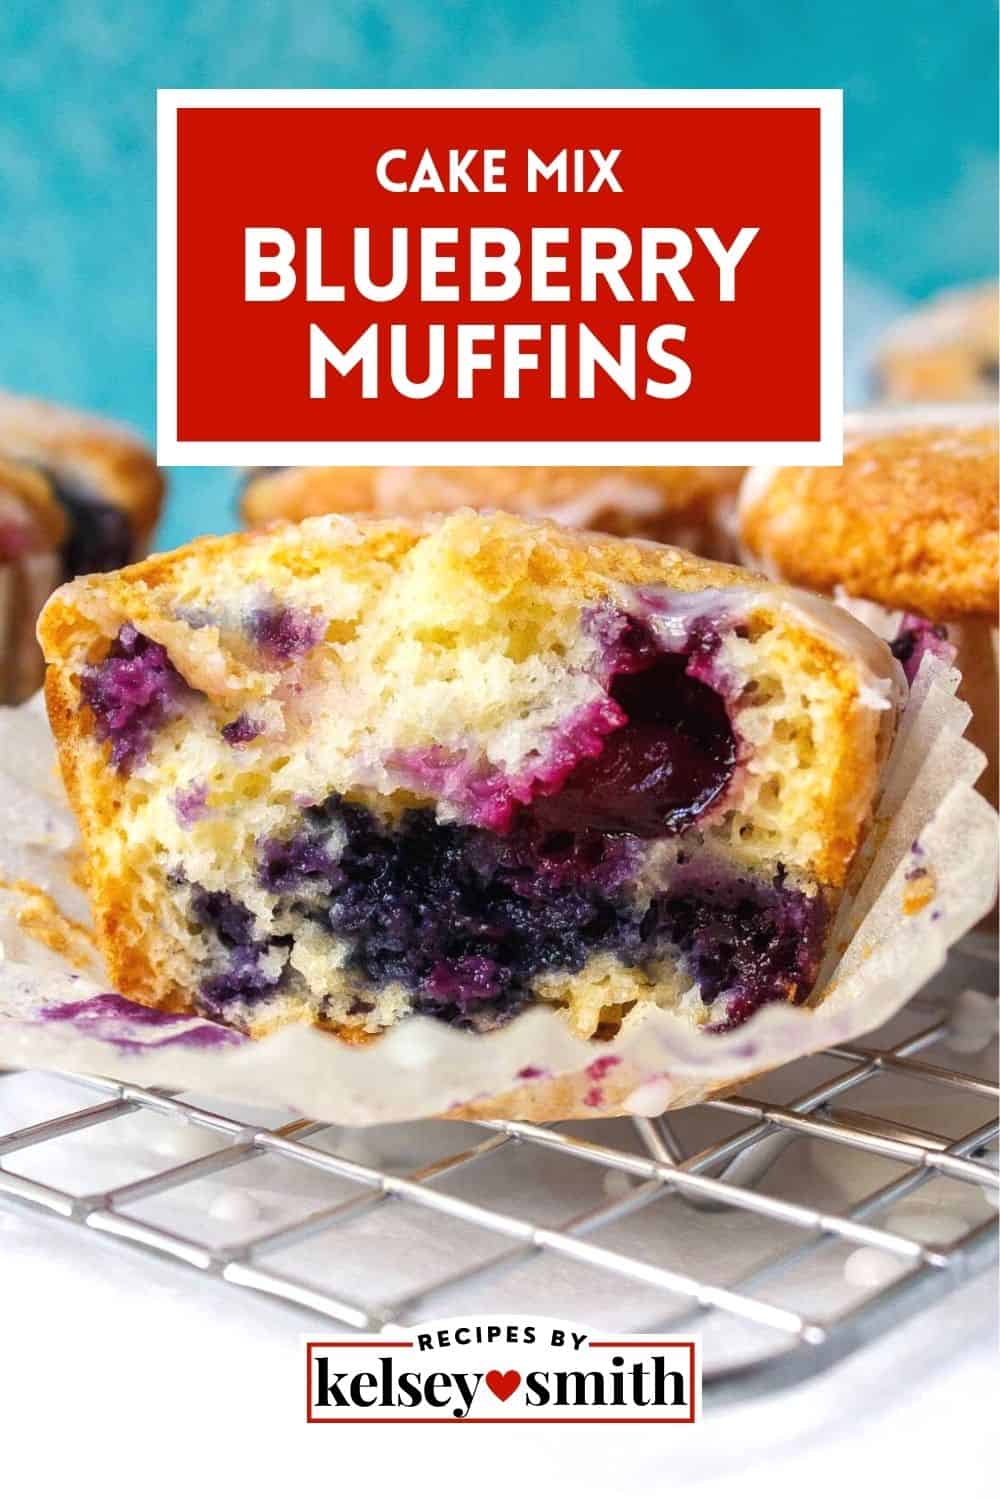 Cake Mix Blueberry Muffins Recipe - By Kelsey Smith